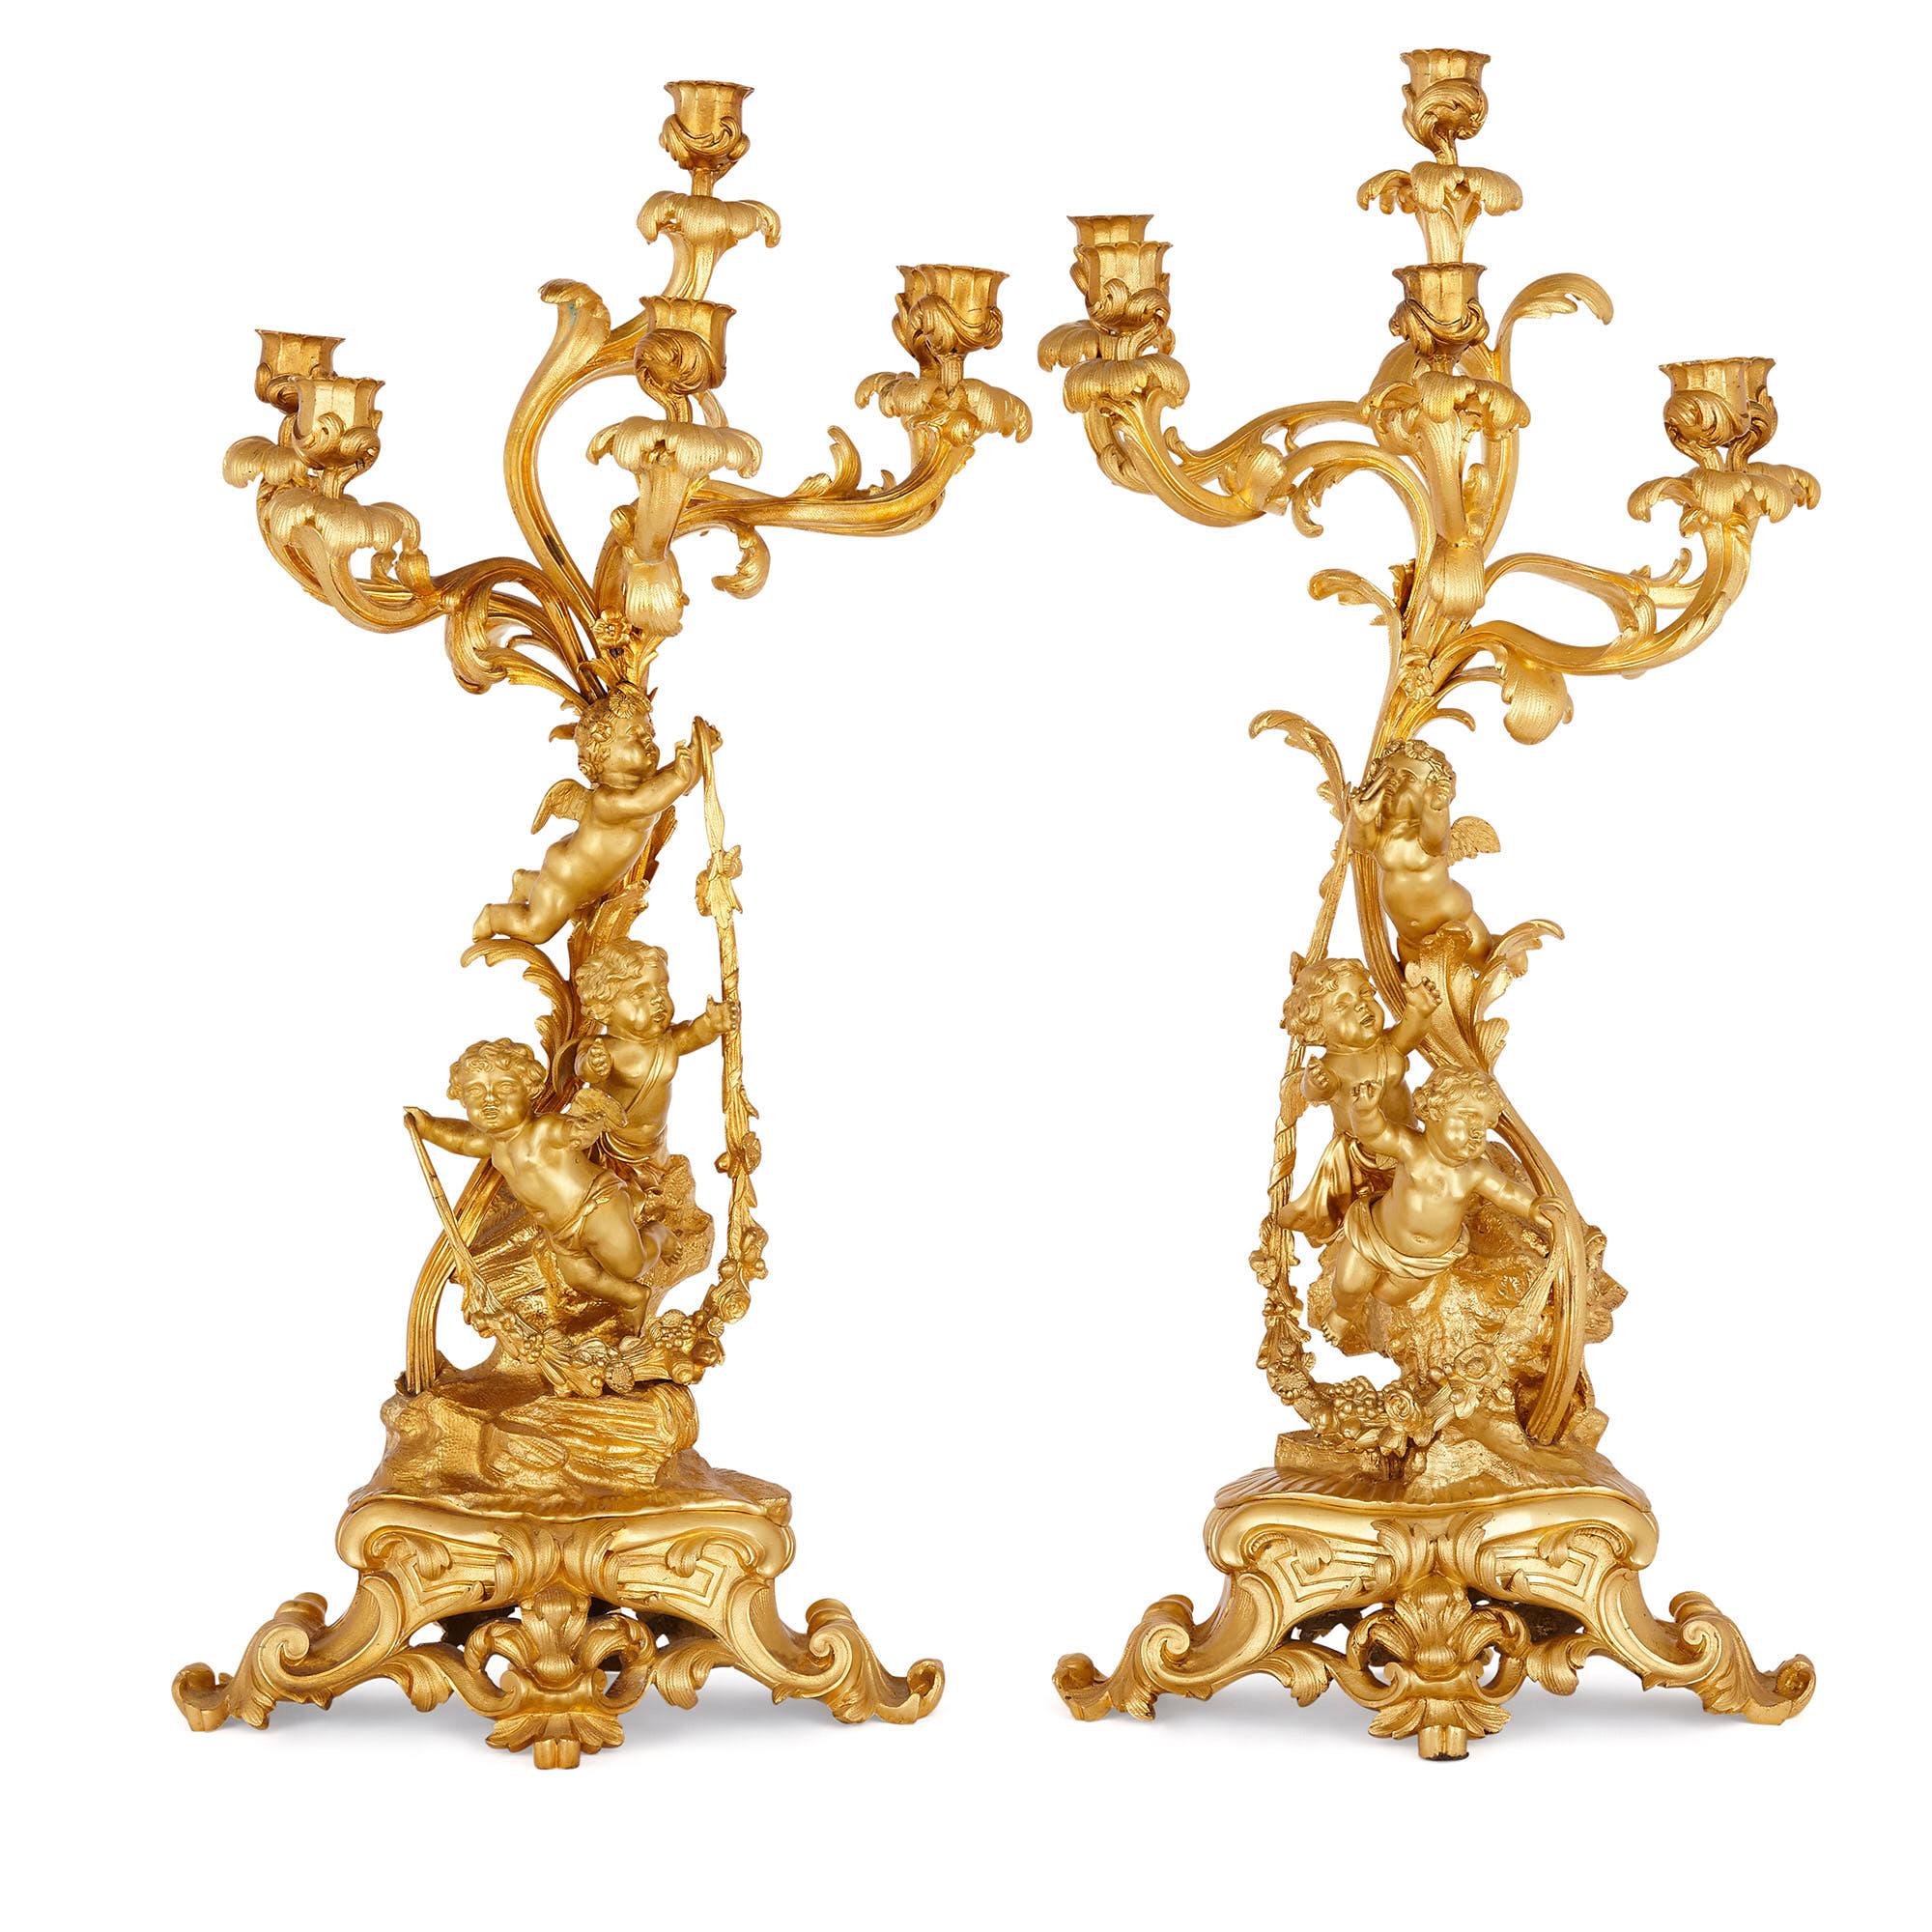 Napoleon III Period Three-Piece Gilt Bronze Clock Set by Lerolle Frères For Sale 3